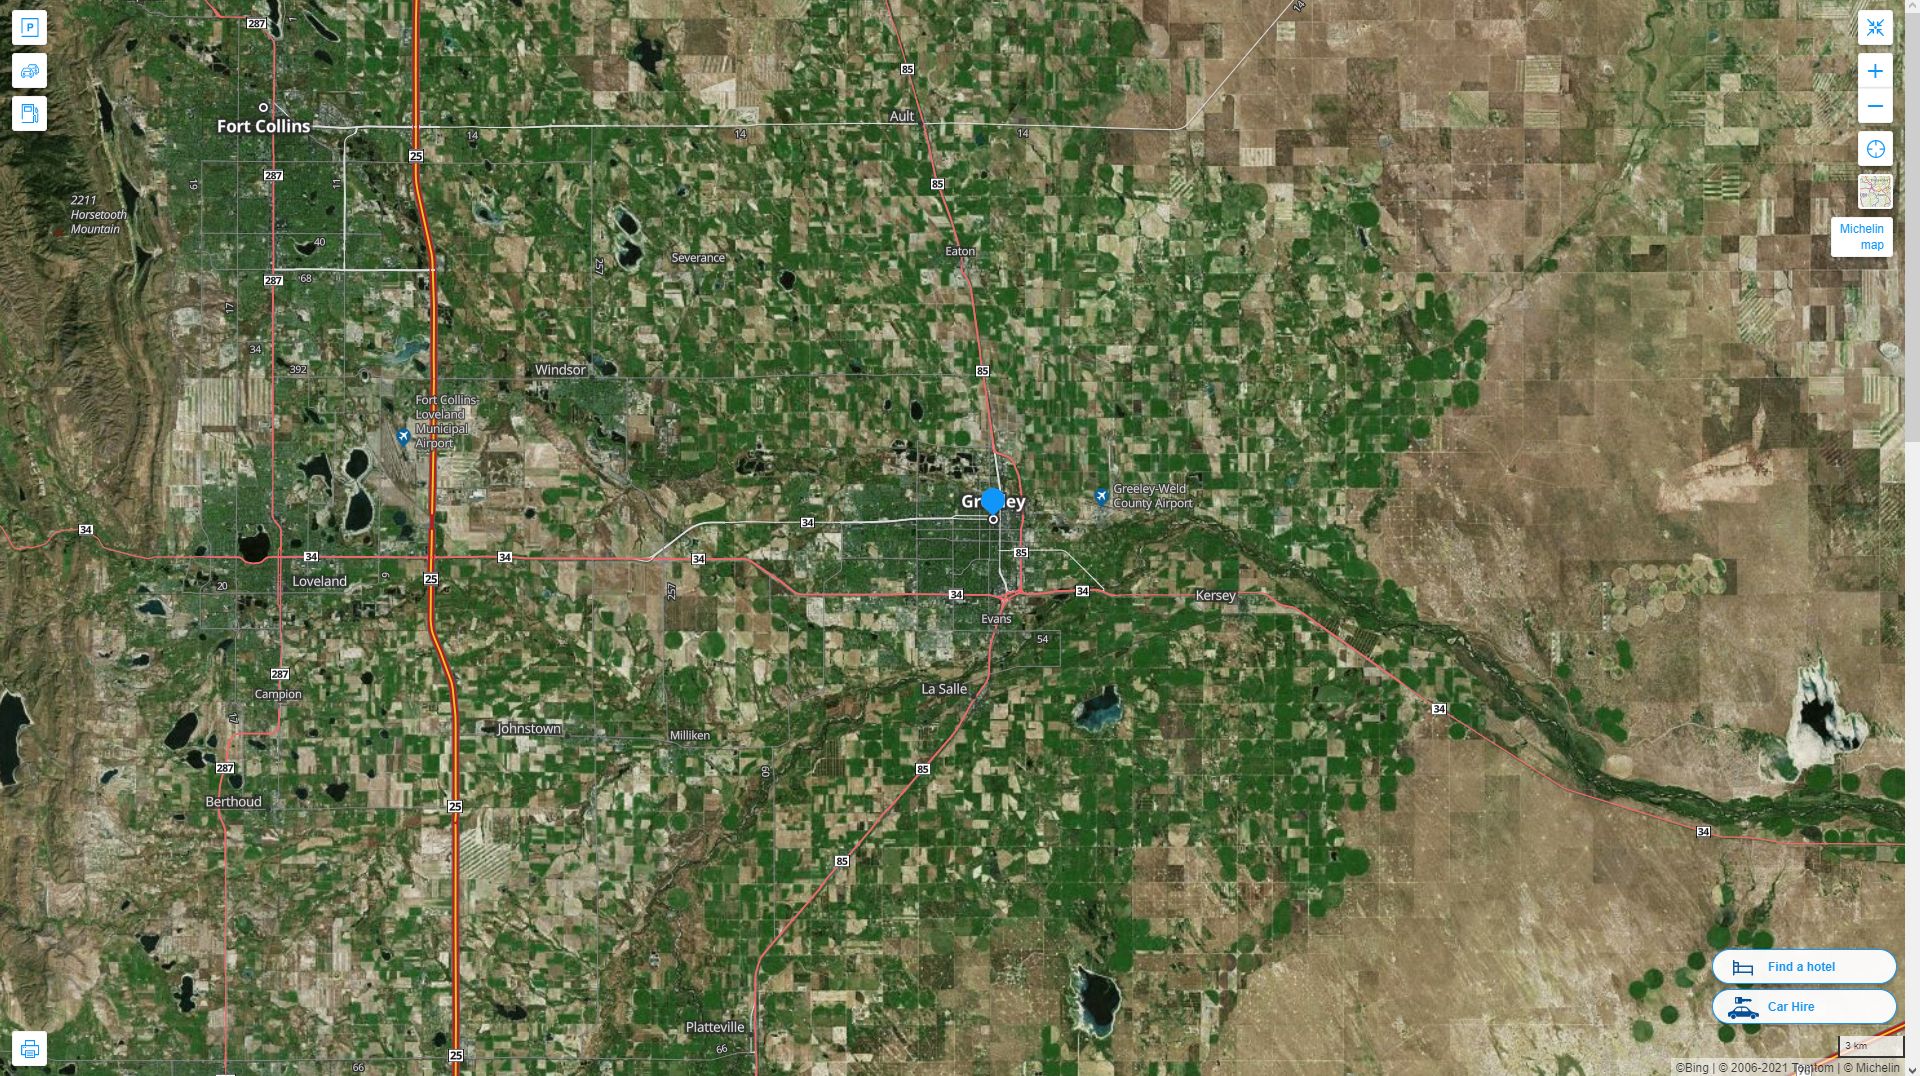 Greeley Colorado Highway and Road Map with Satellite View